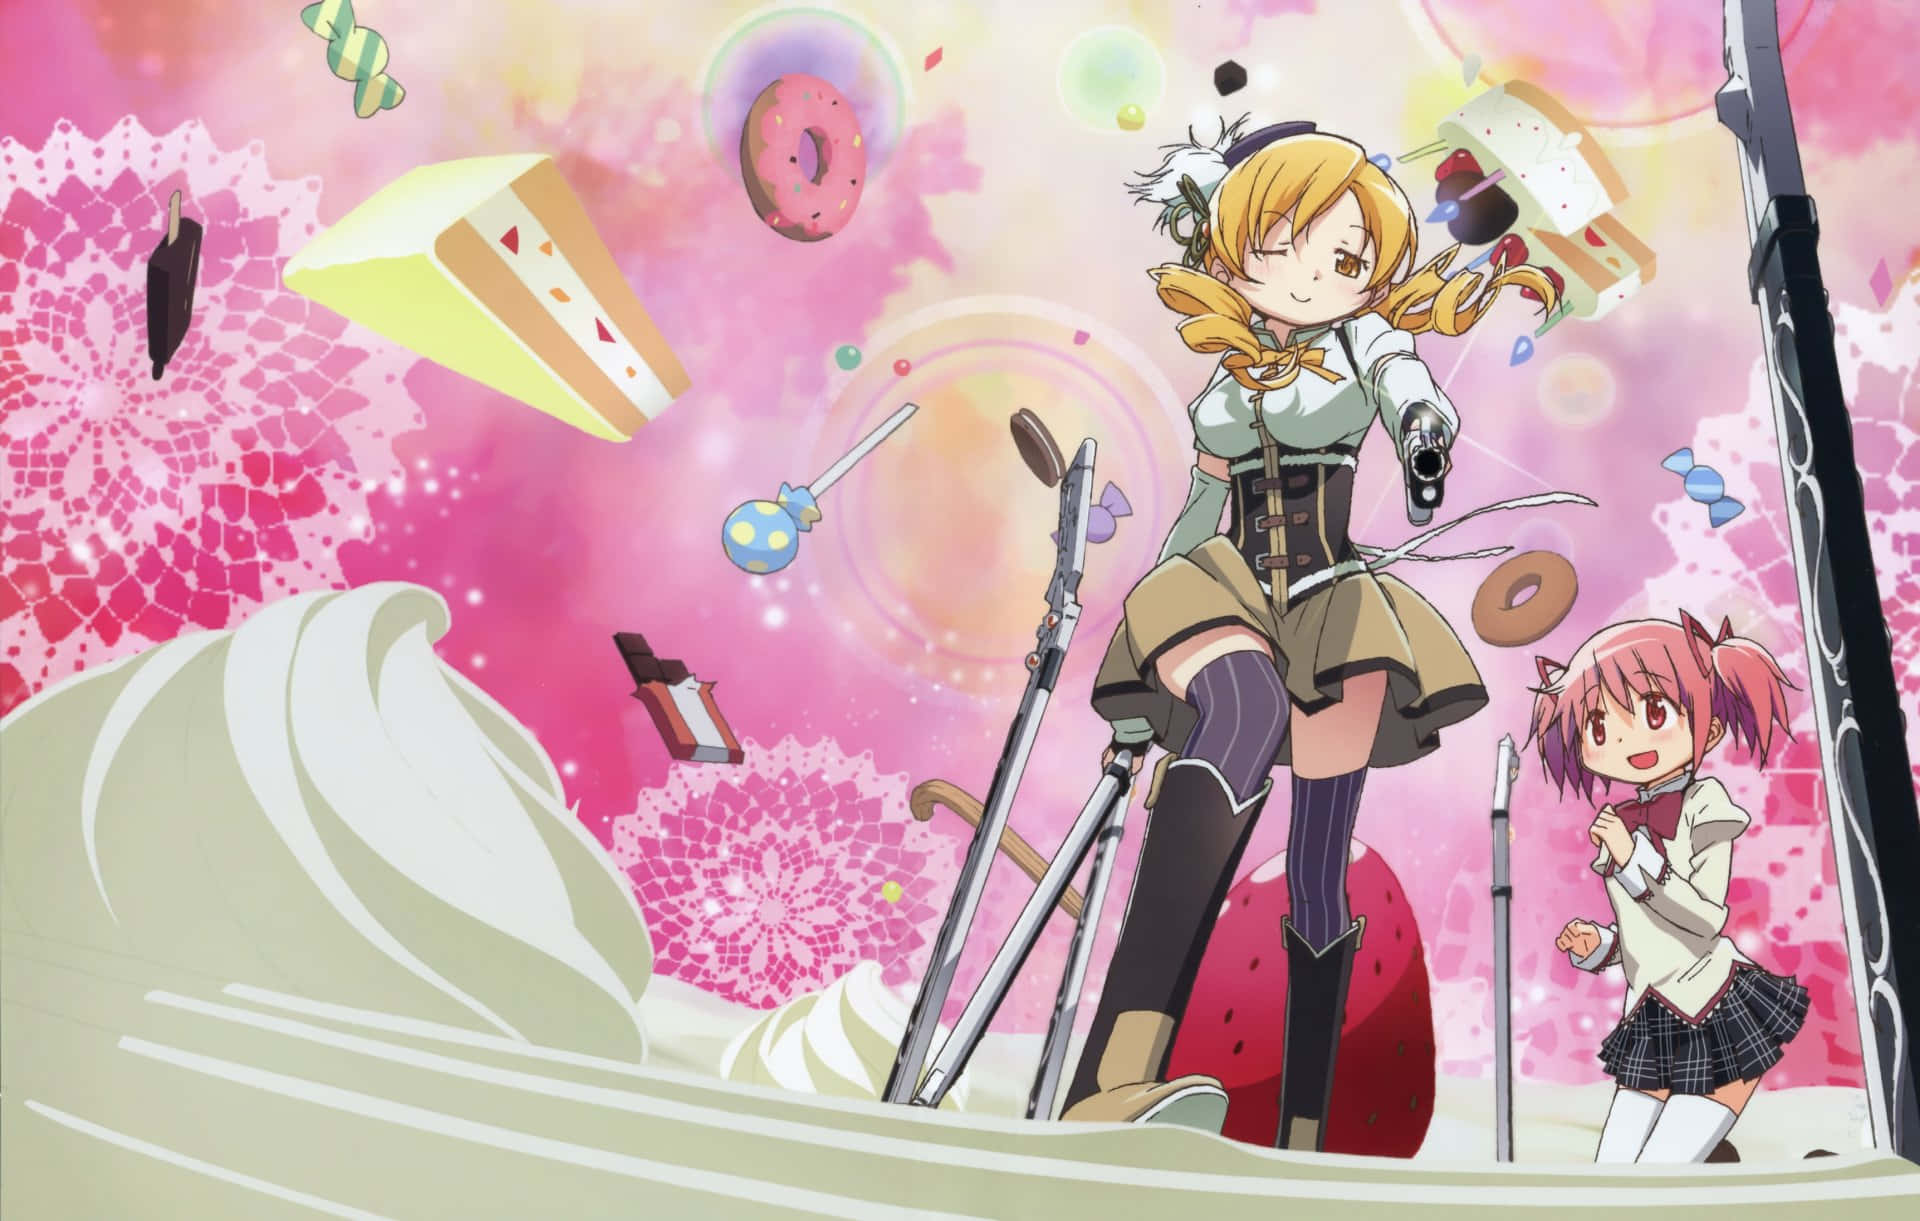 These magical girls in Madoka Magica have taken their own destinies in their hands.